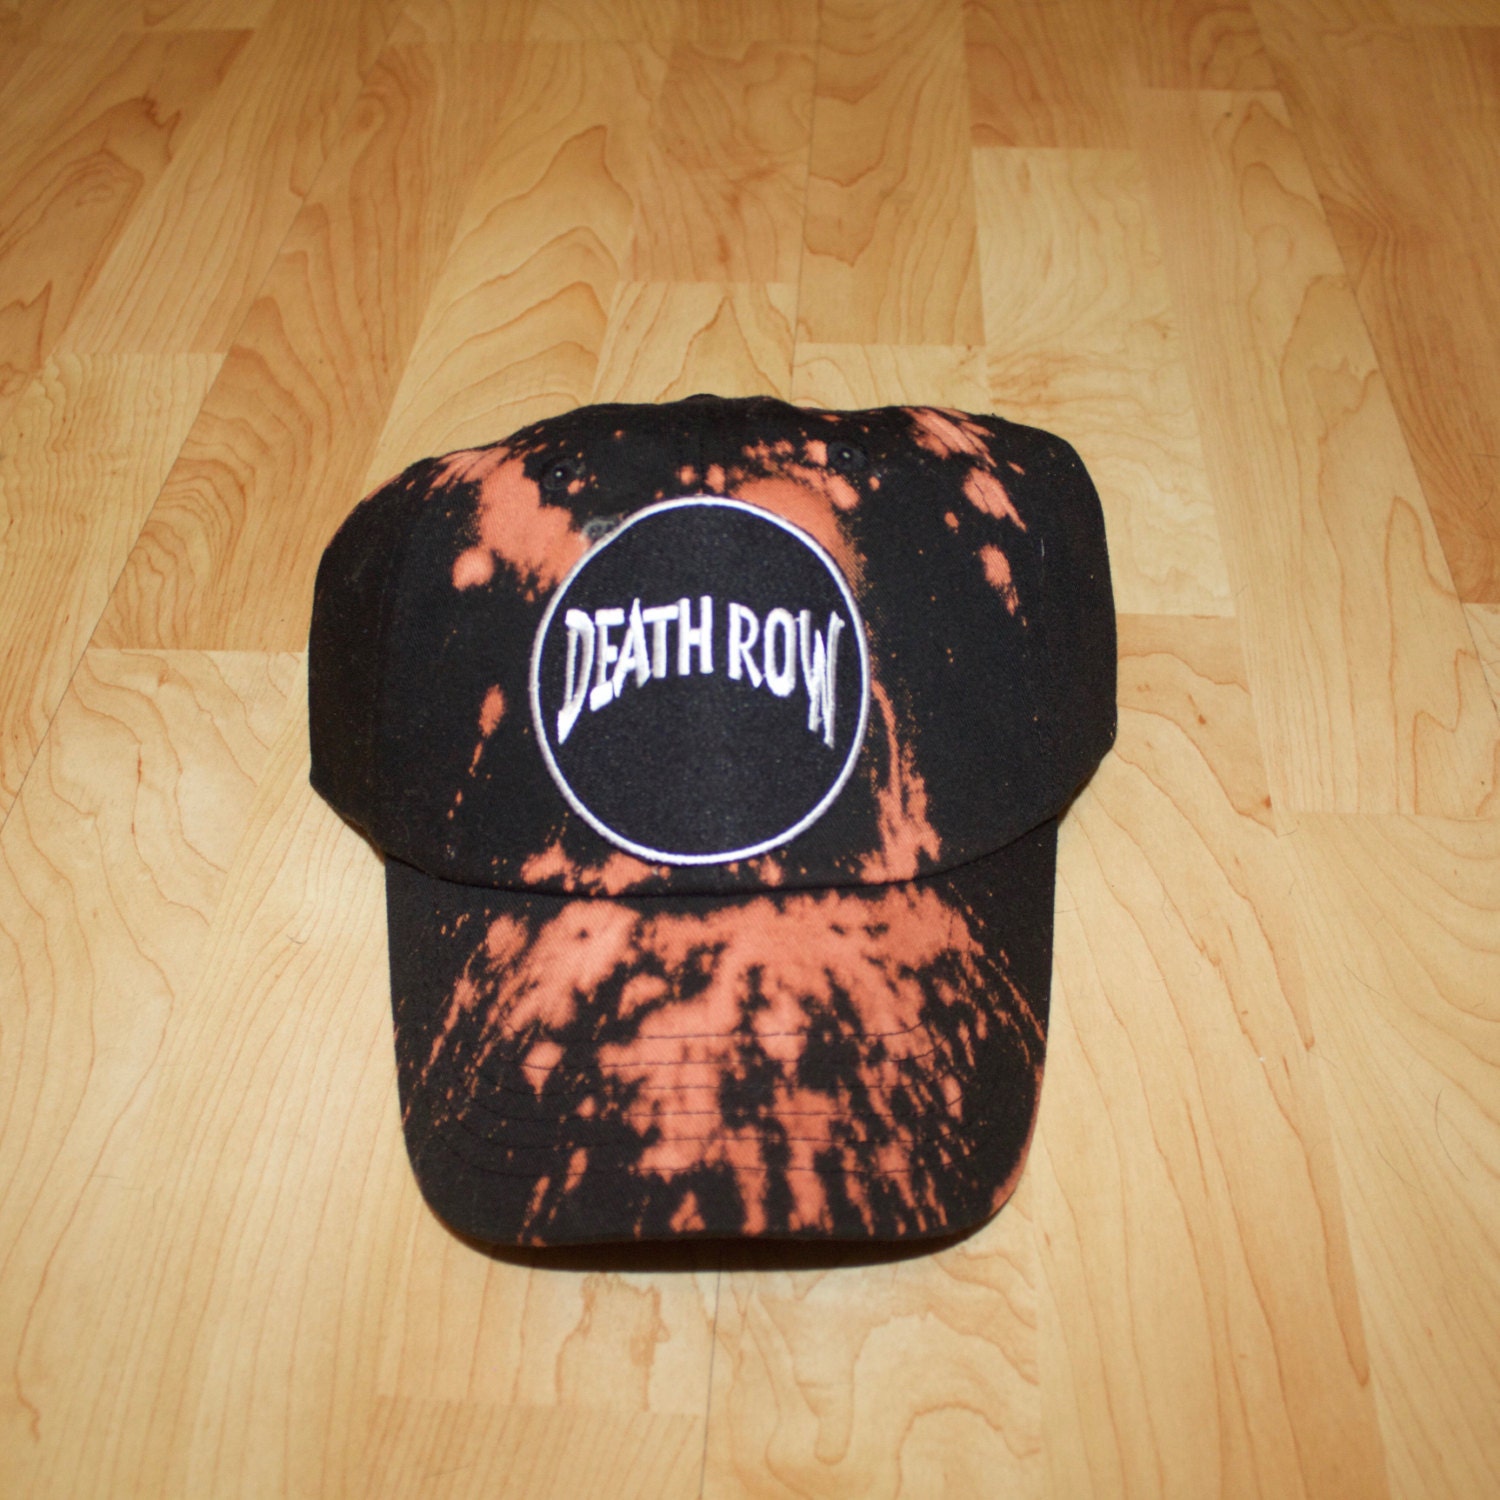 deathrow records hat